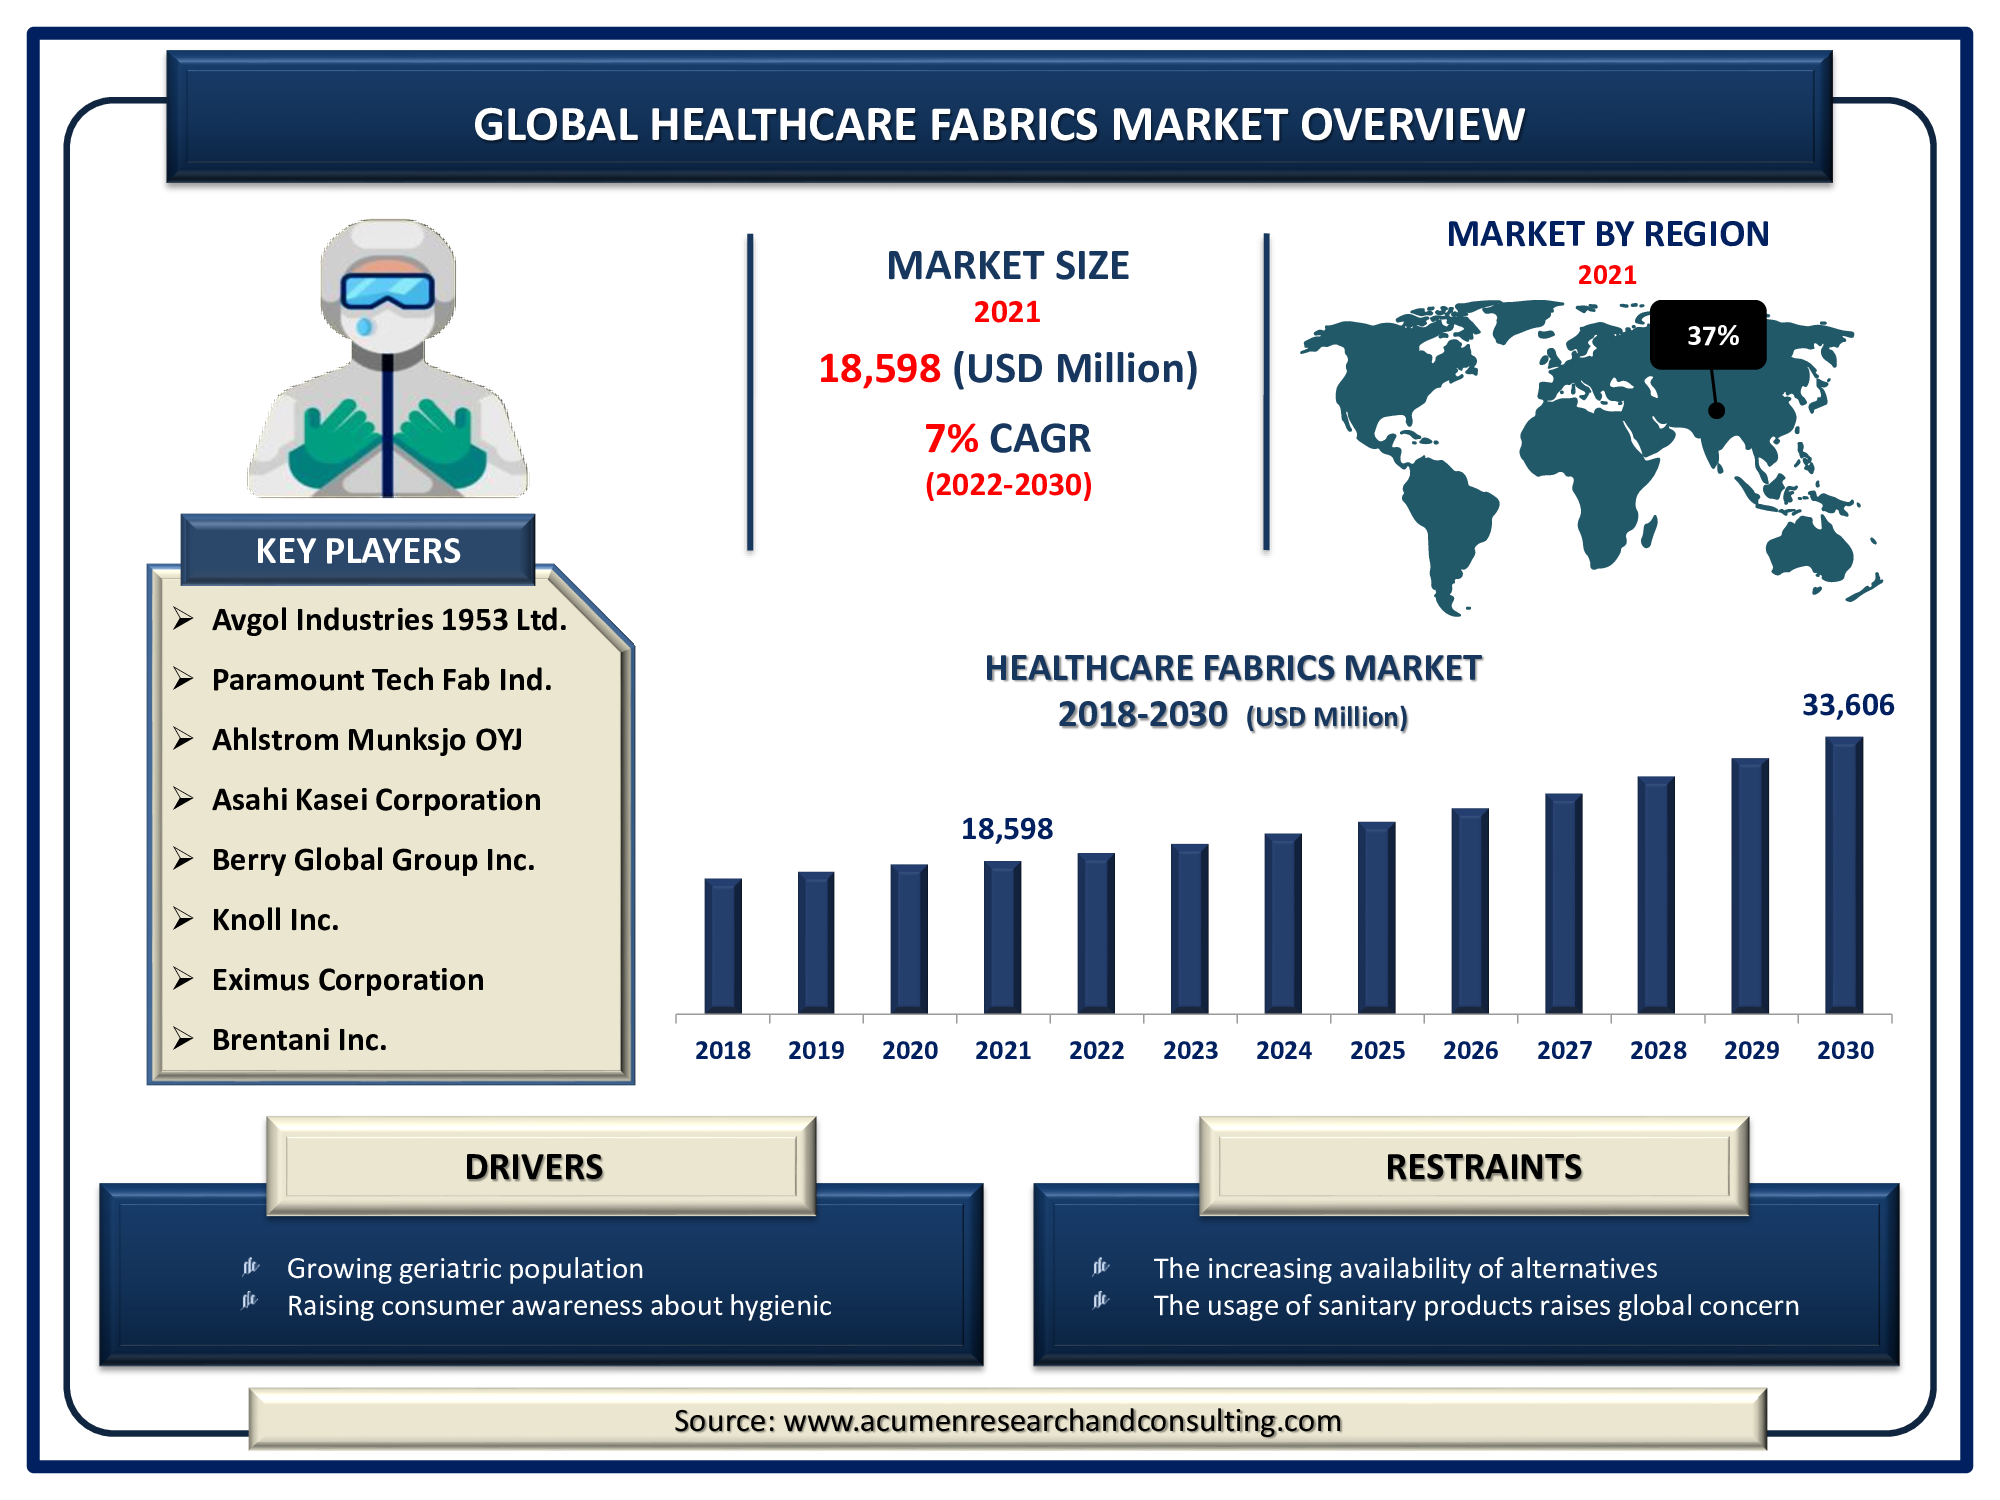 Healthcare Fabrics Market is expected to reach USD 33,606 Million by 2030 with a considerable CAGR of 7%